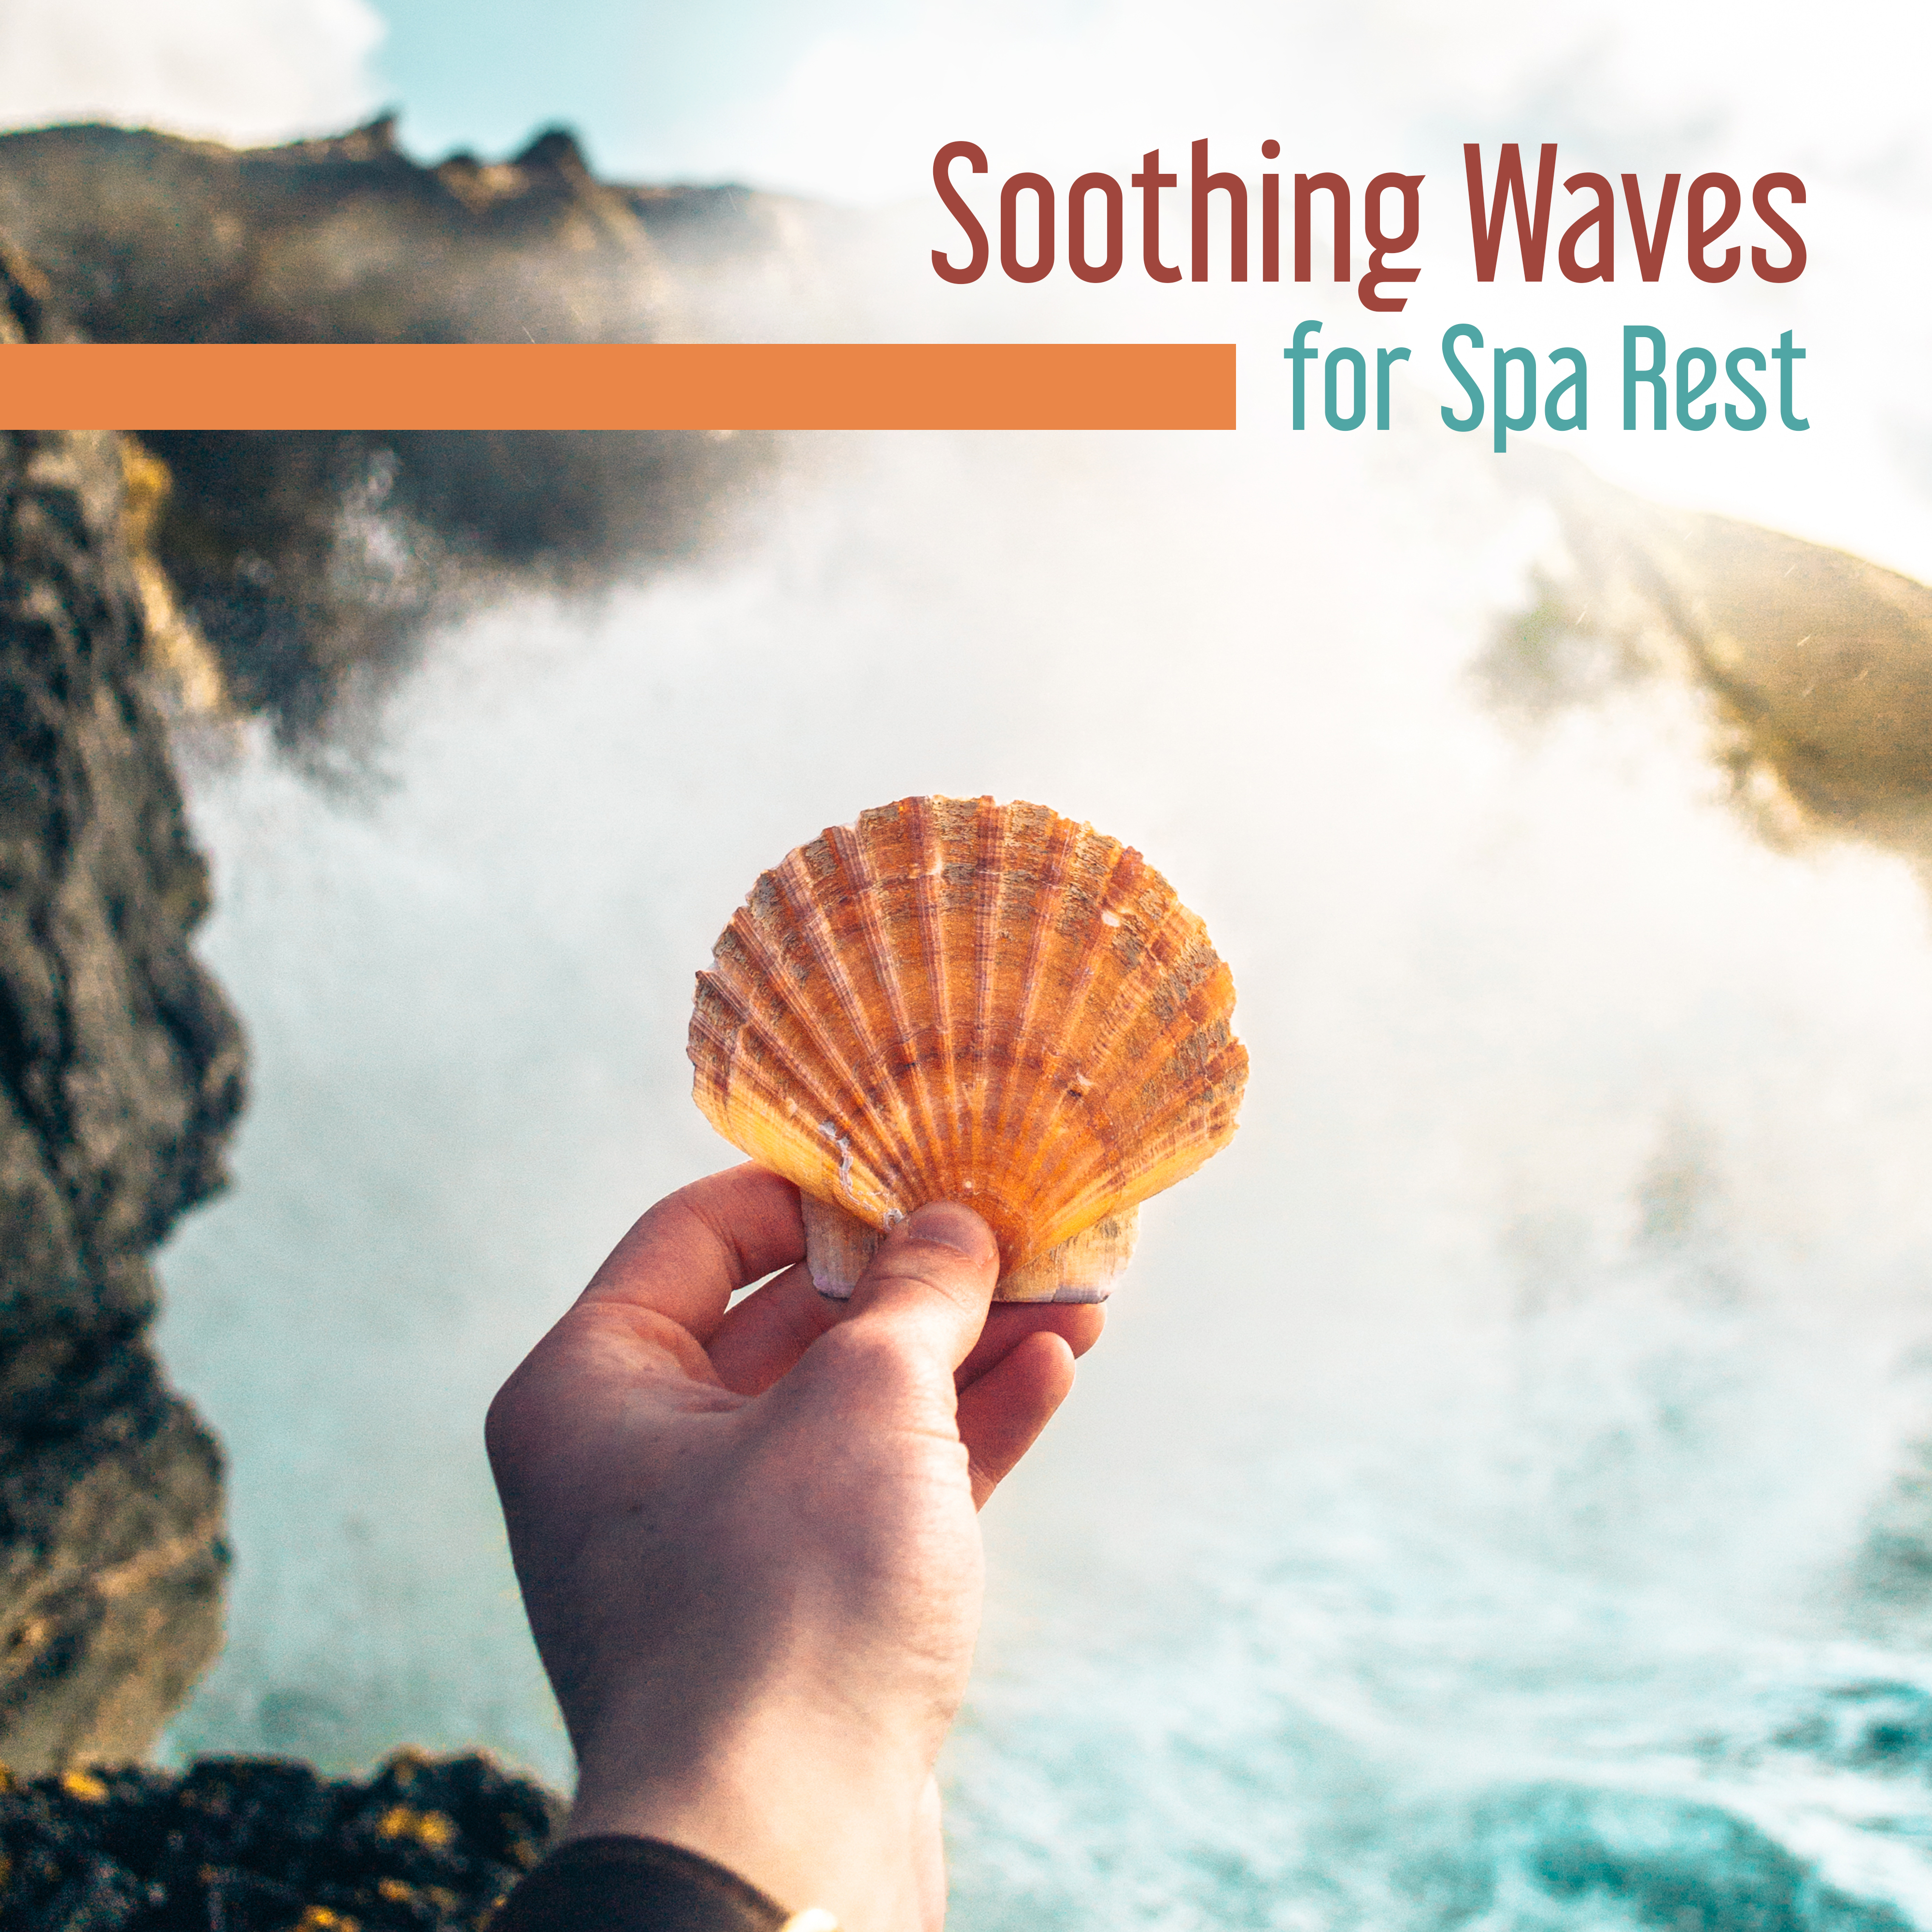 Soothing Waves for Spa Rest  New Age Music to Relax in Spa, Best Way to Rest, Peaceful Mind  Body